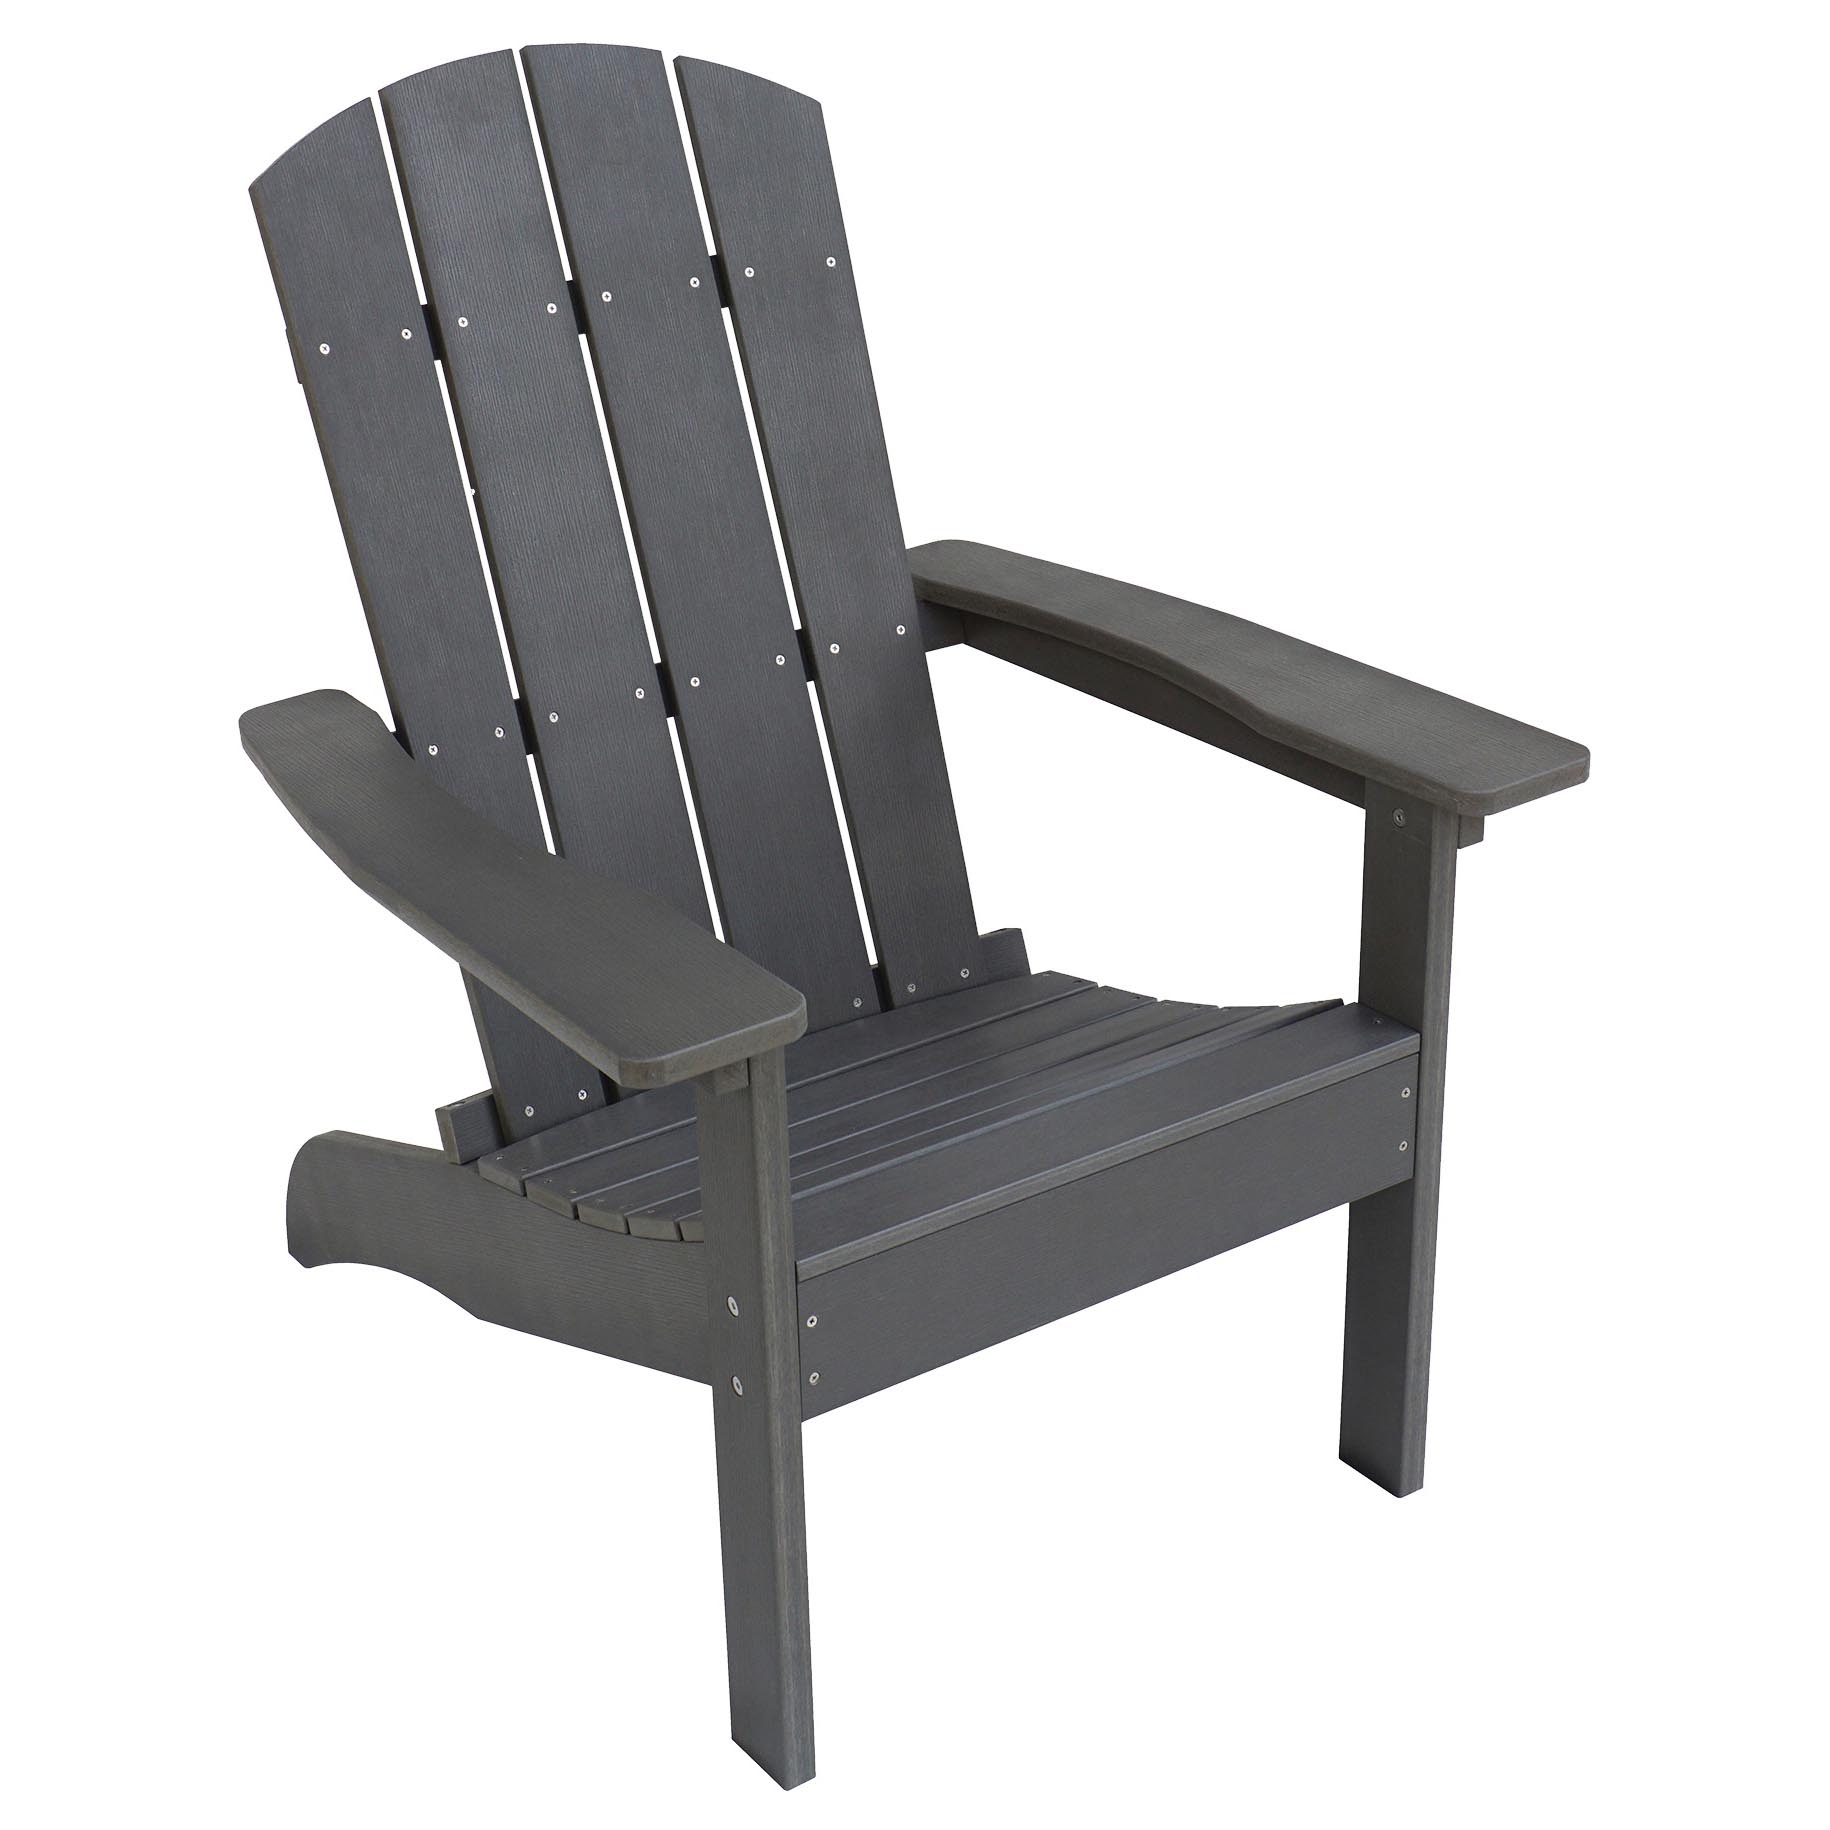 E8733QPW003 Adirondack Chair, 29 in W, 32 in D, 38 in H, Resin Wood Seat, Polystyrene Frame